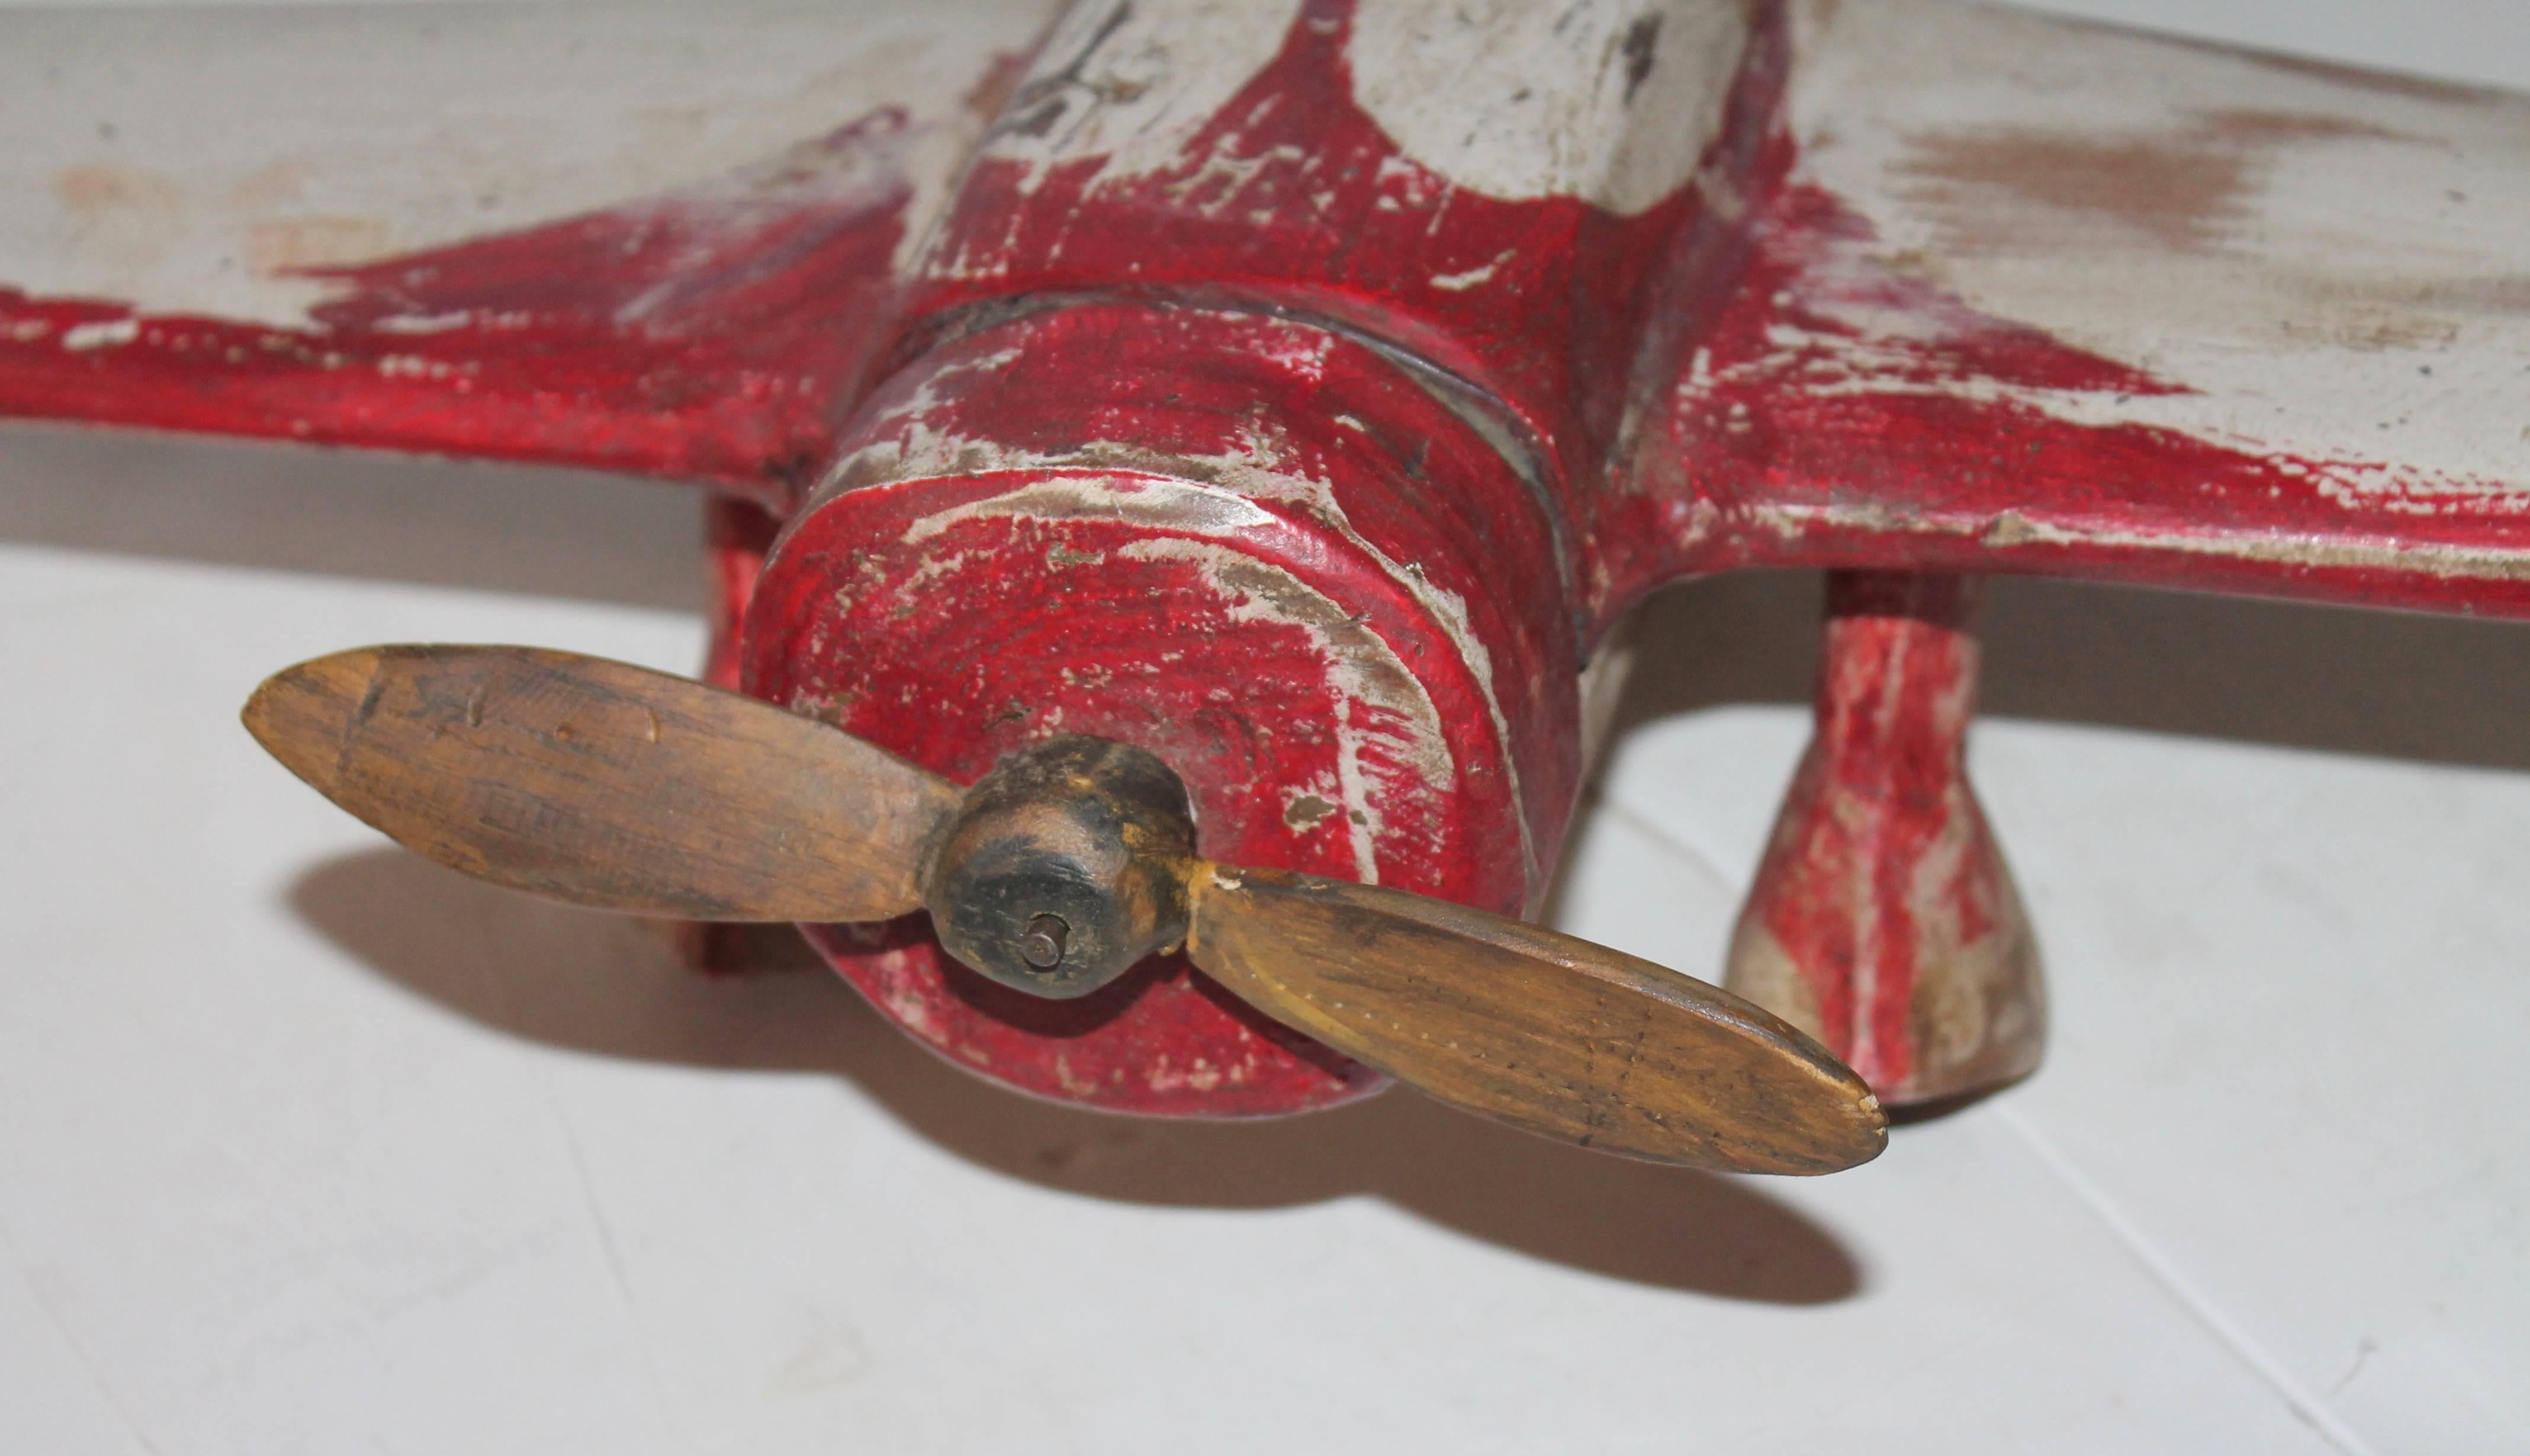 This folky airplane is quite cool and very rustic. It has a wonderful worn patina and is functional for a kids to play with. It looks more like a piece of Folk Art.